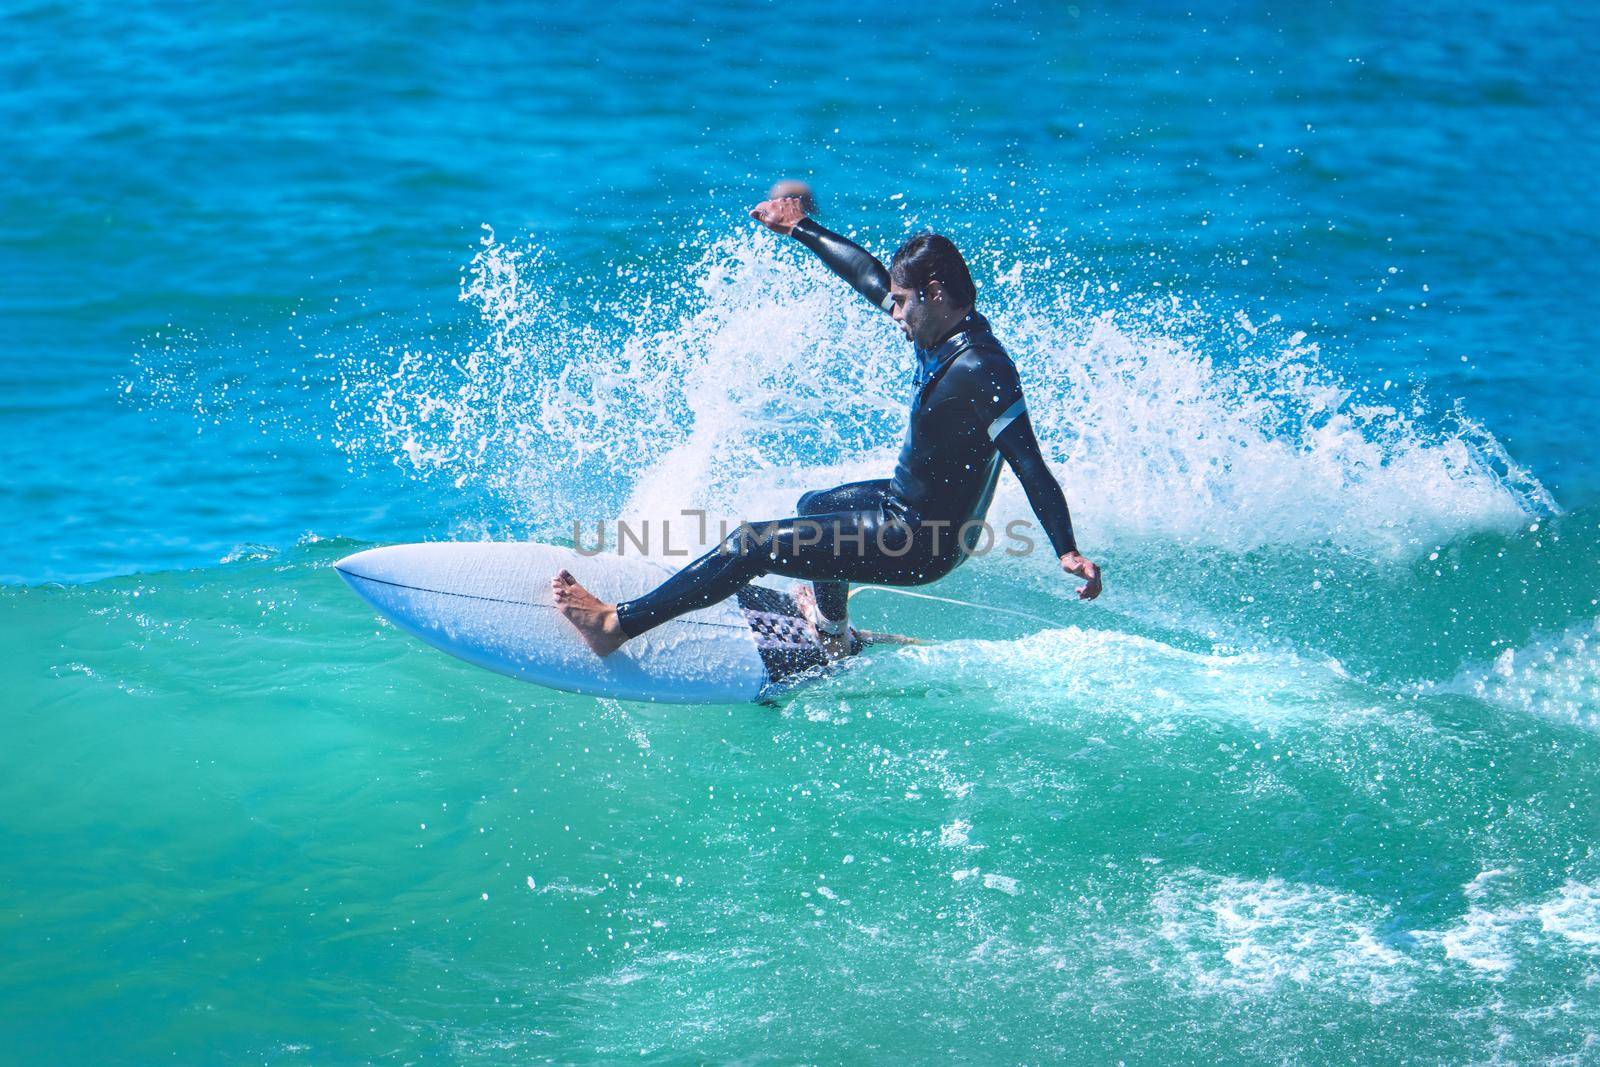 Surfer riding the wave on shortboard. Man catching waves in ocean. Water sports activity by DariaKulkova